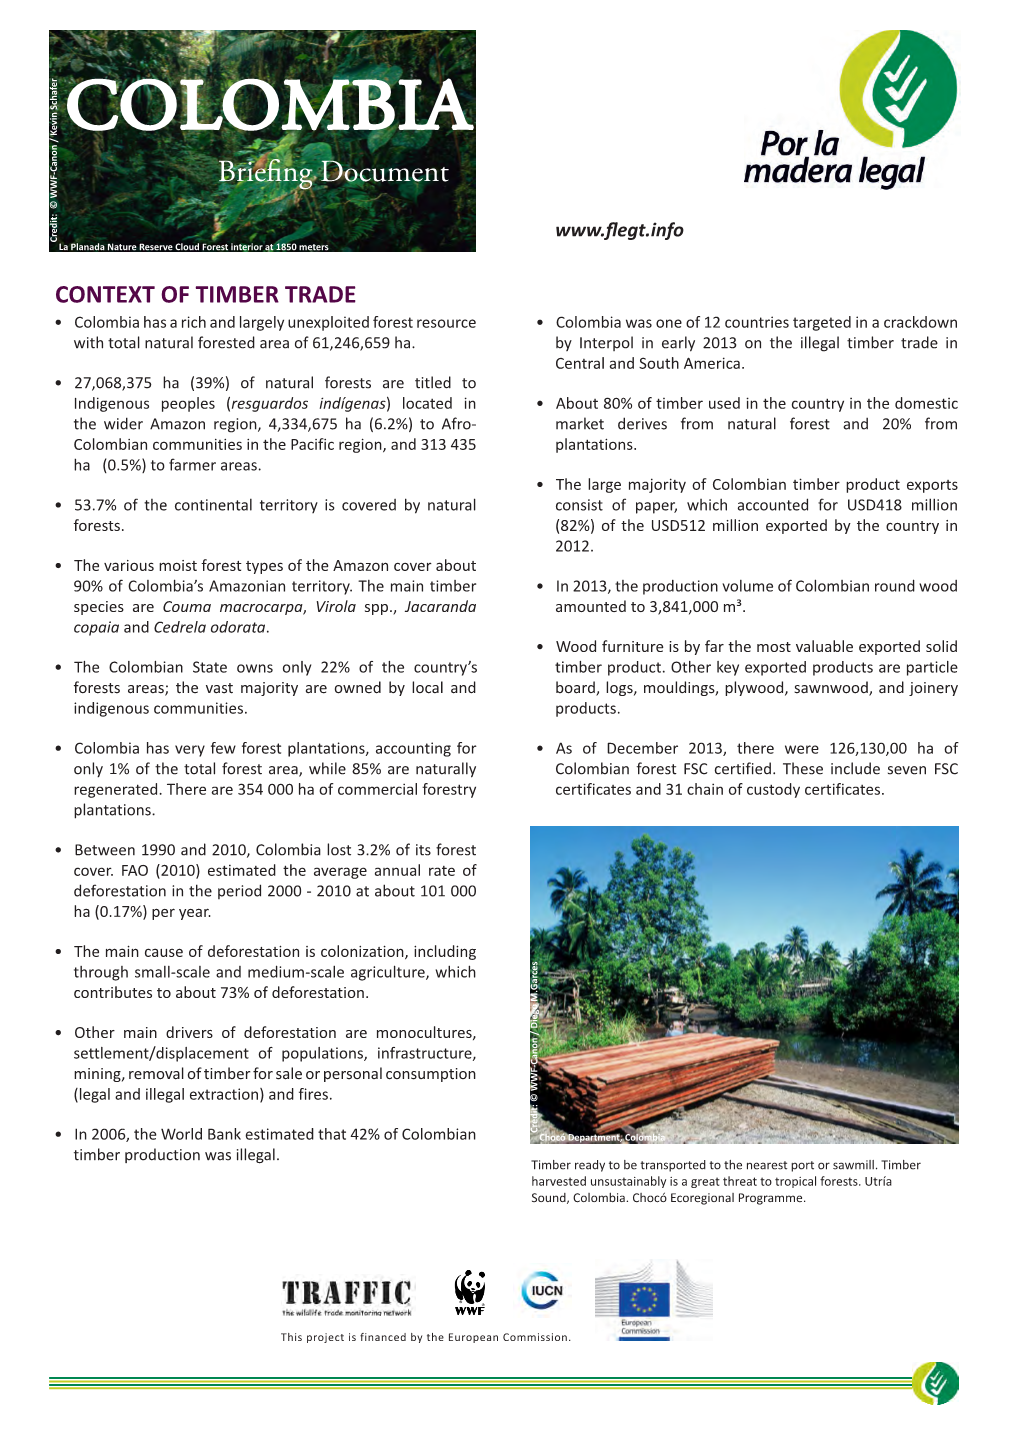 Briefing Paper on Timber Production in Colombia (PDF, 1.6